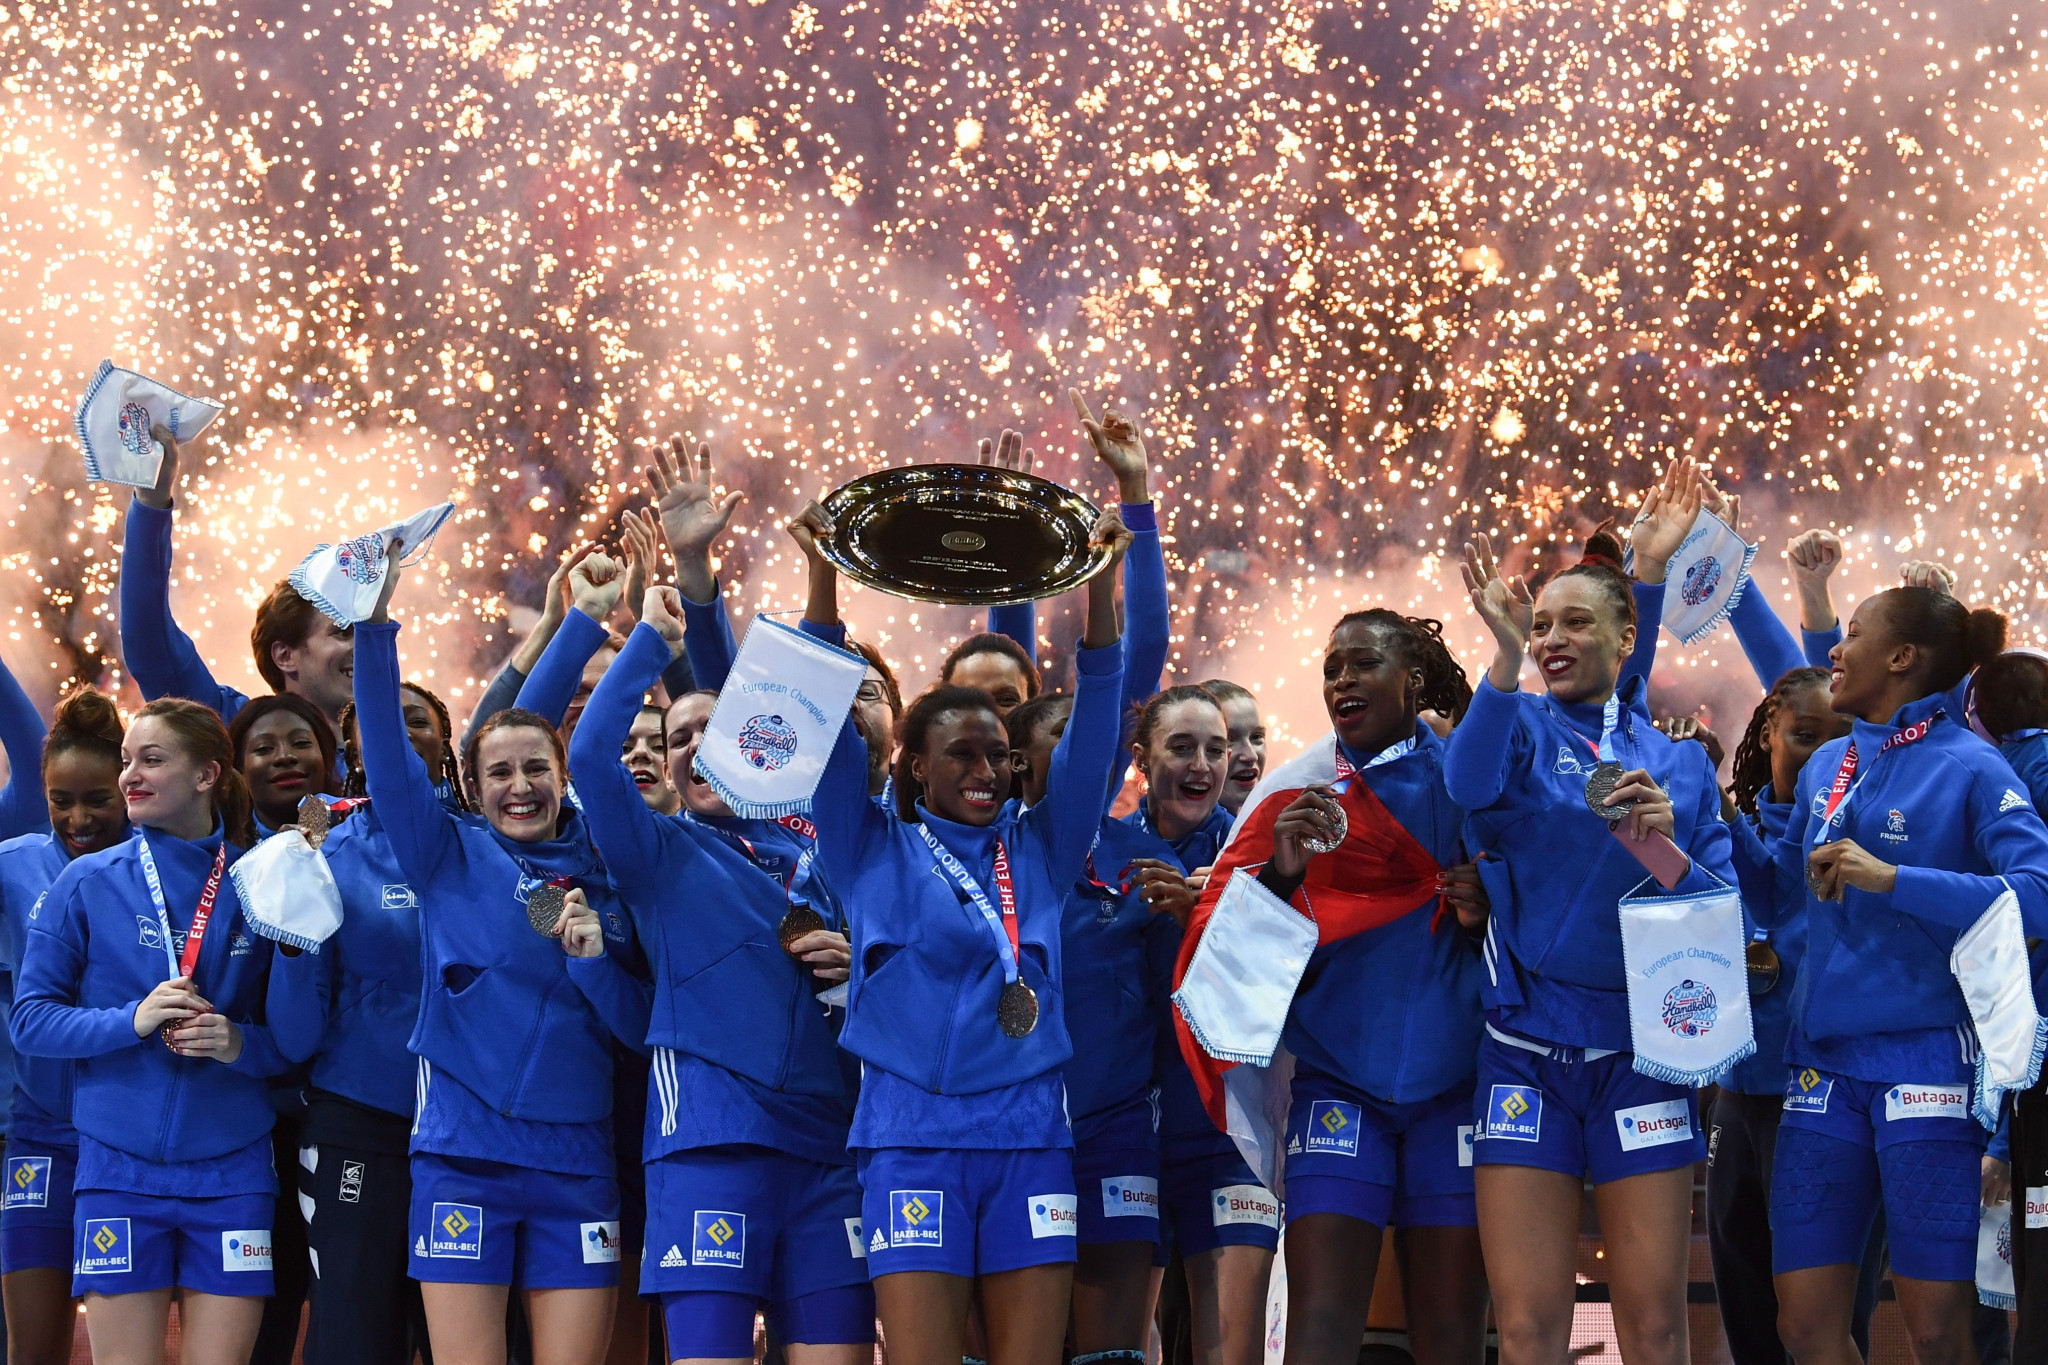 France are the defending European Women's Handball champions after winning the title on home soil in 2018 ©Getty Images